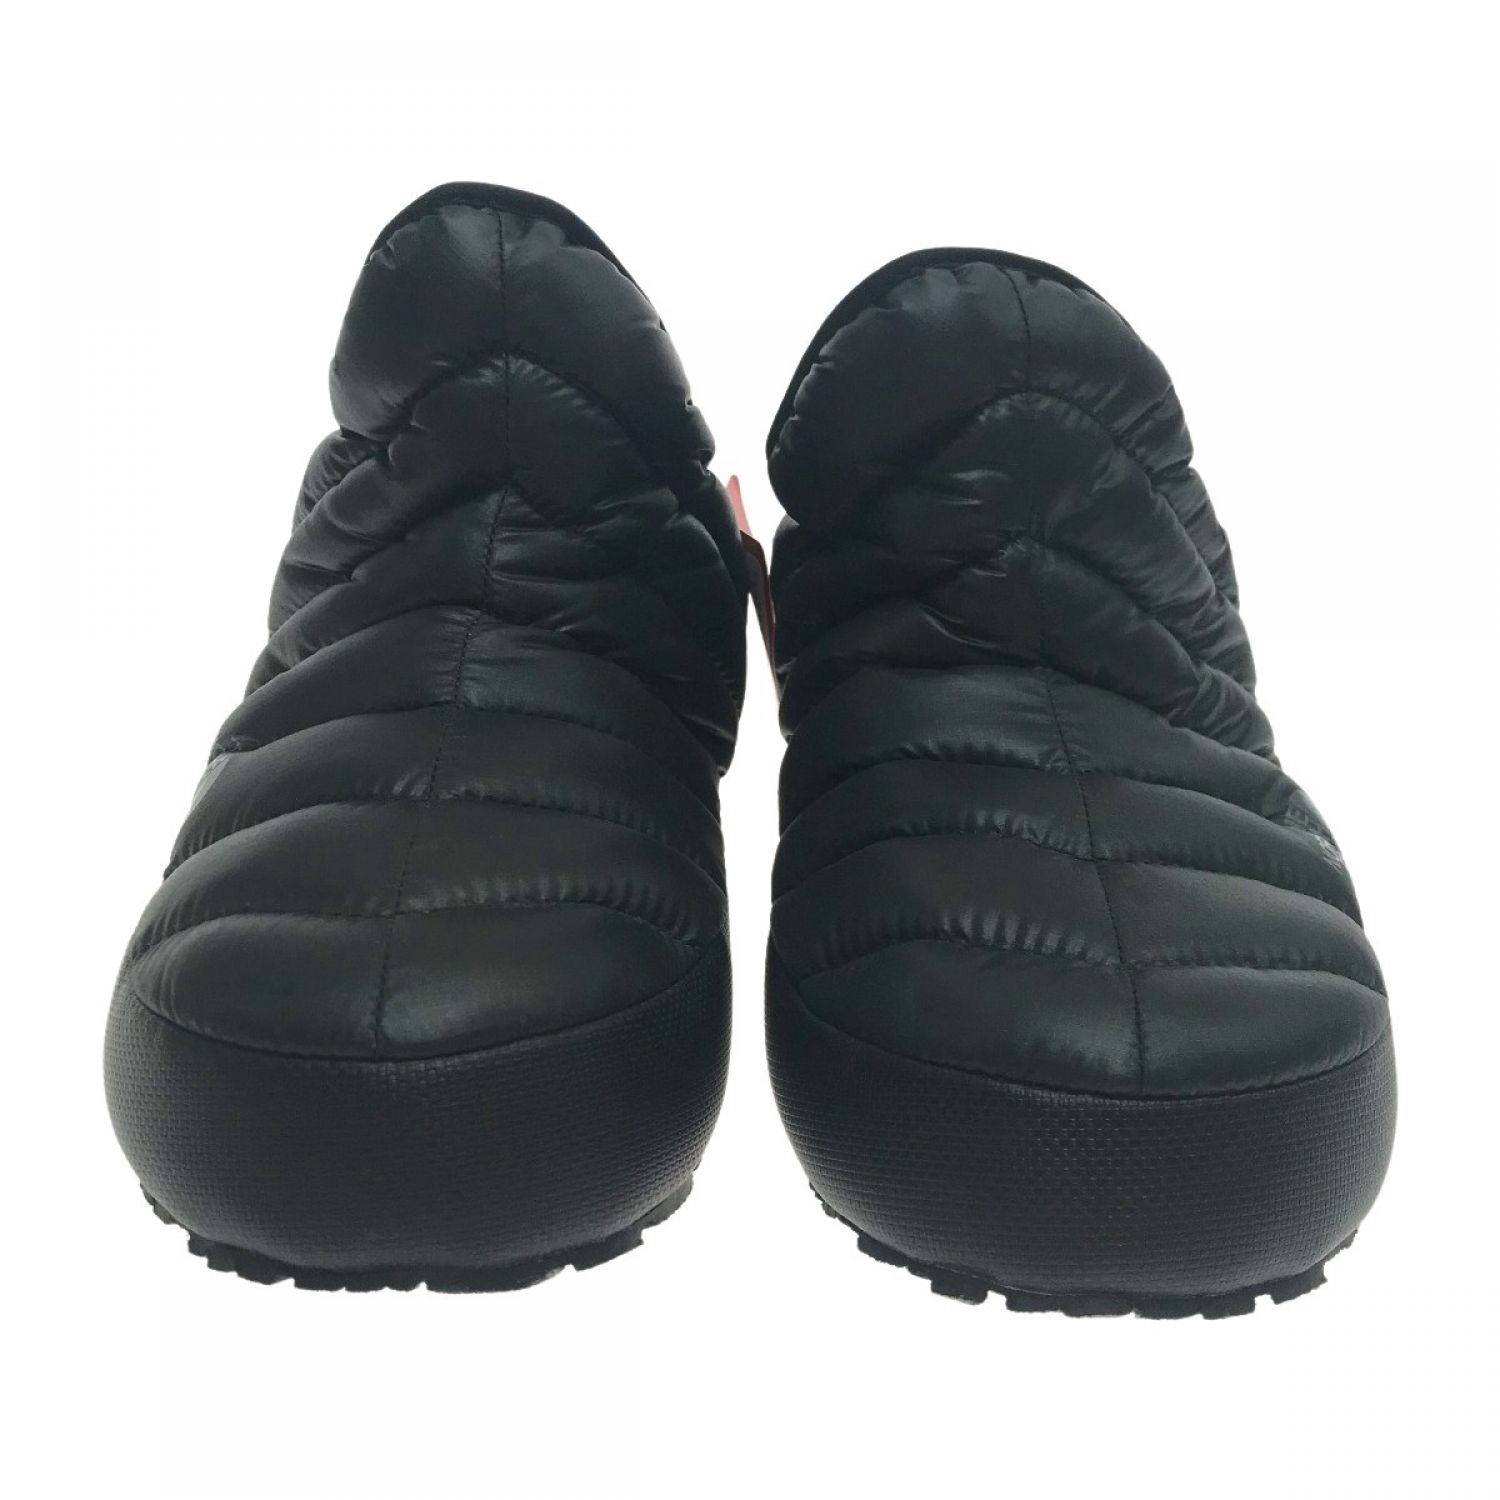 The NorthFace Thermoball Traction Bootie